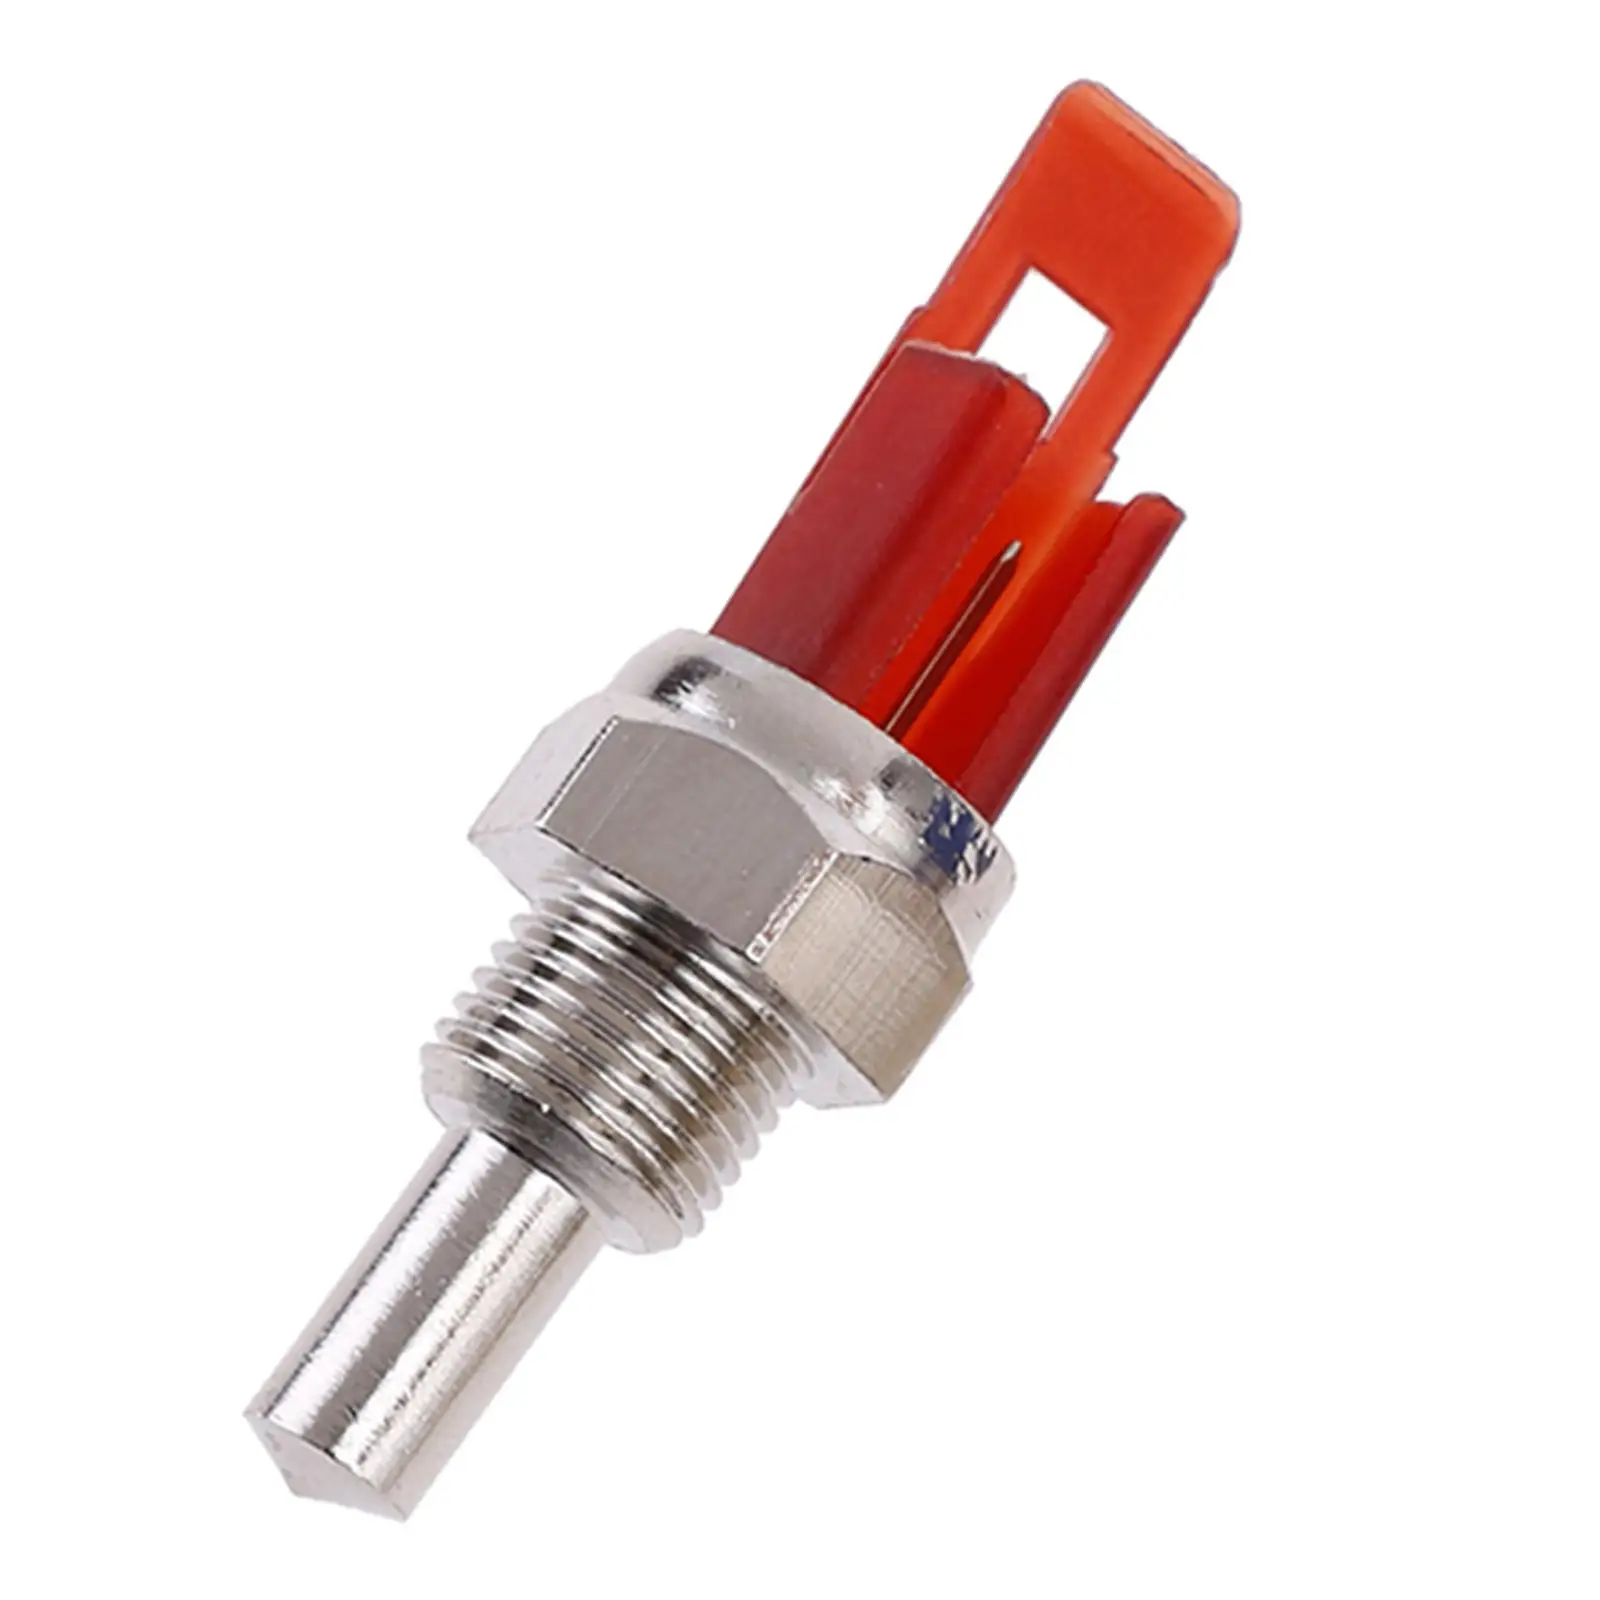 Ntc Temperature Sensor Gas Water Heater Spare Parts High professional for Water Heater Stoves Gas Heater Accessories